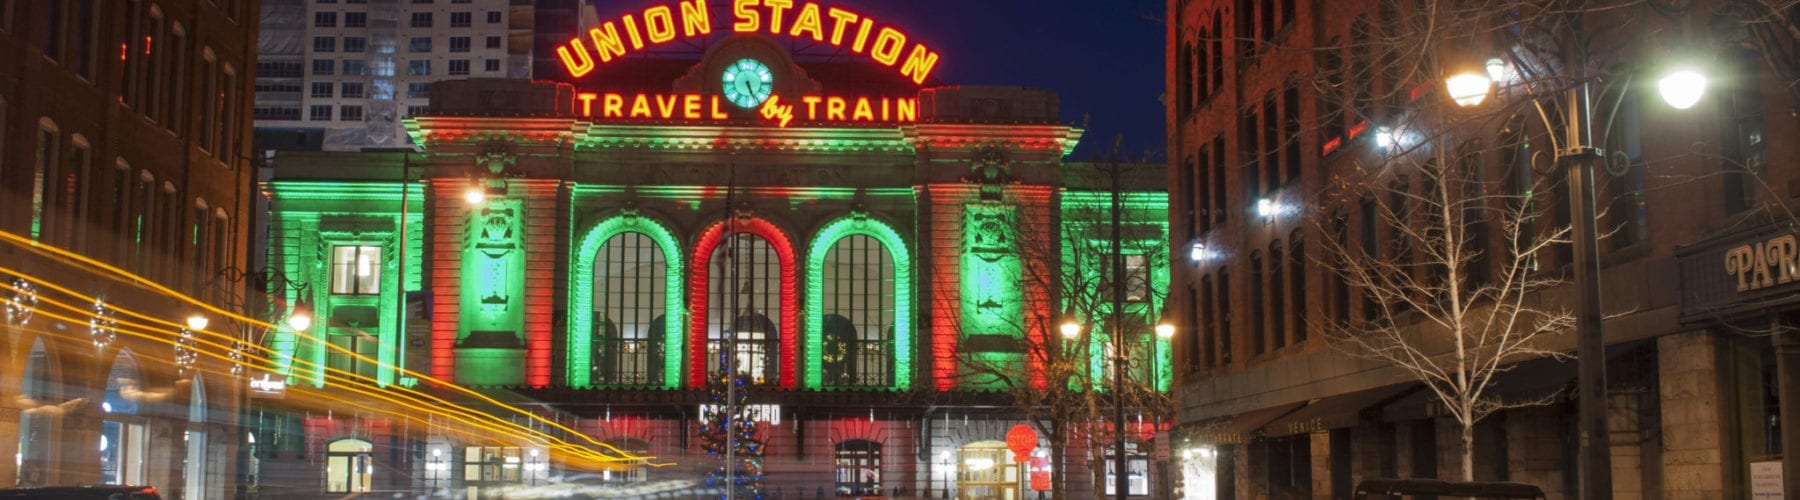 Union Station Lit Up During Christmas in Denver